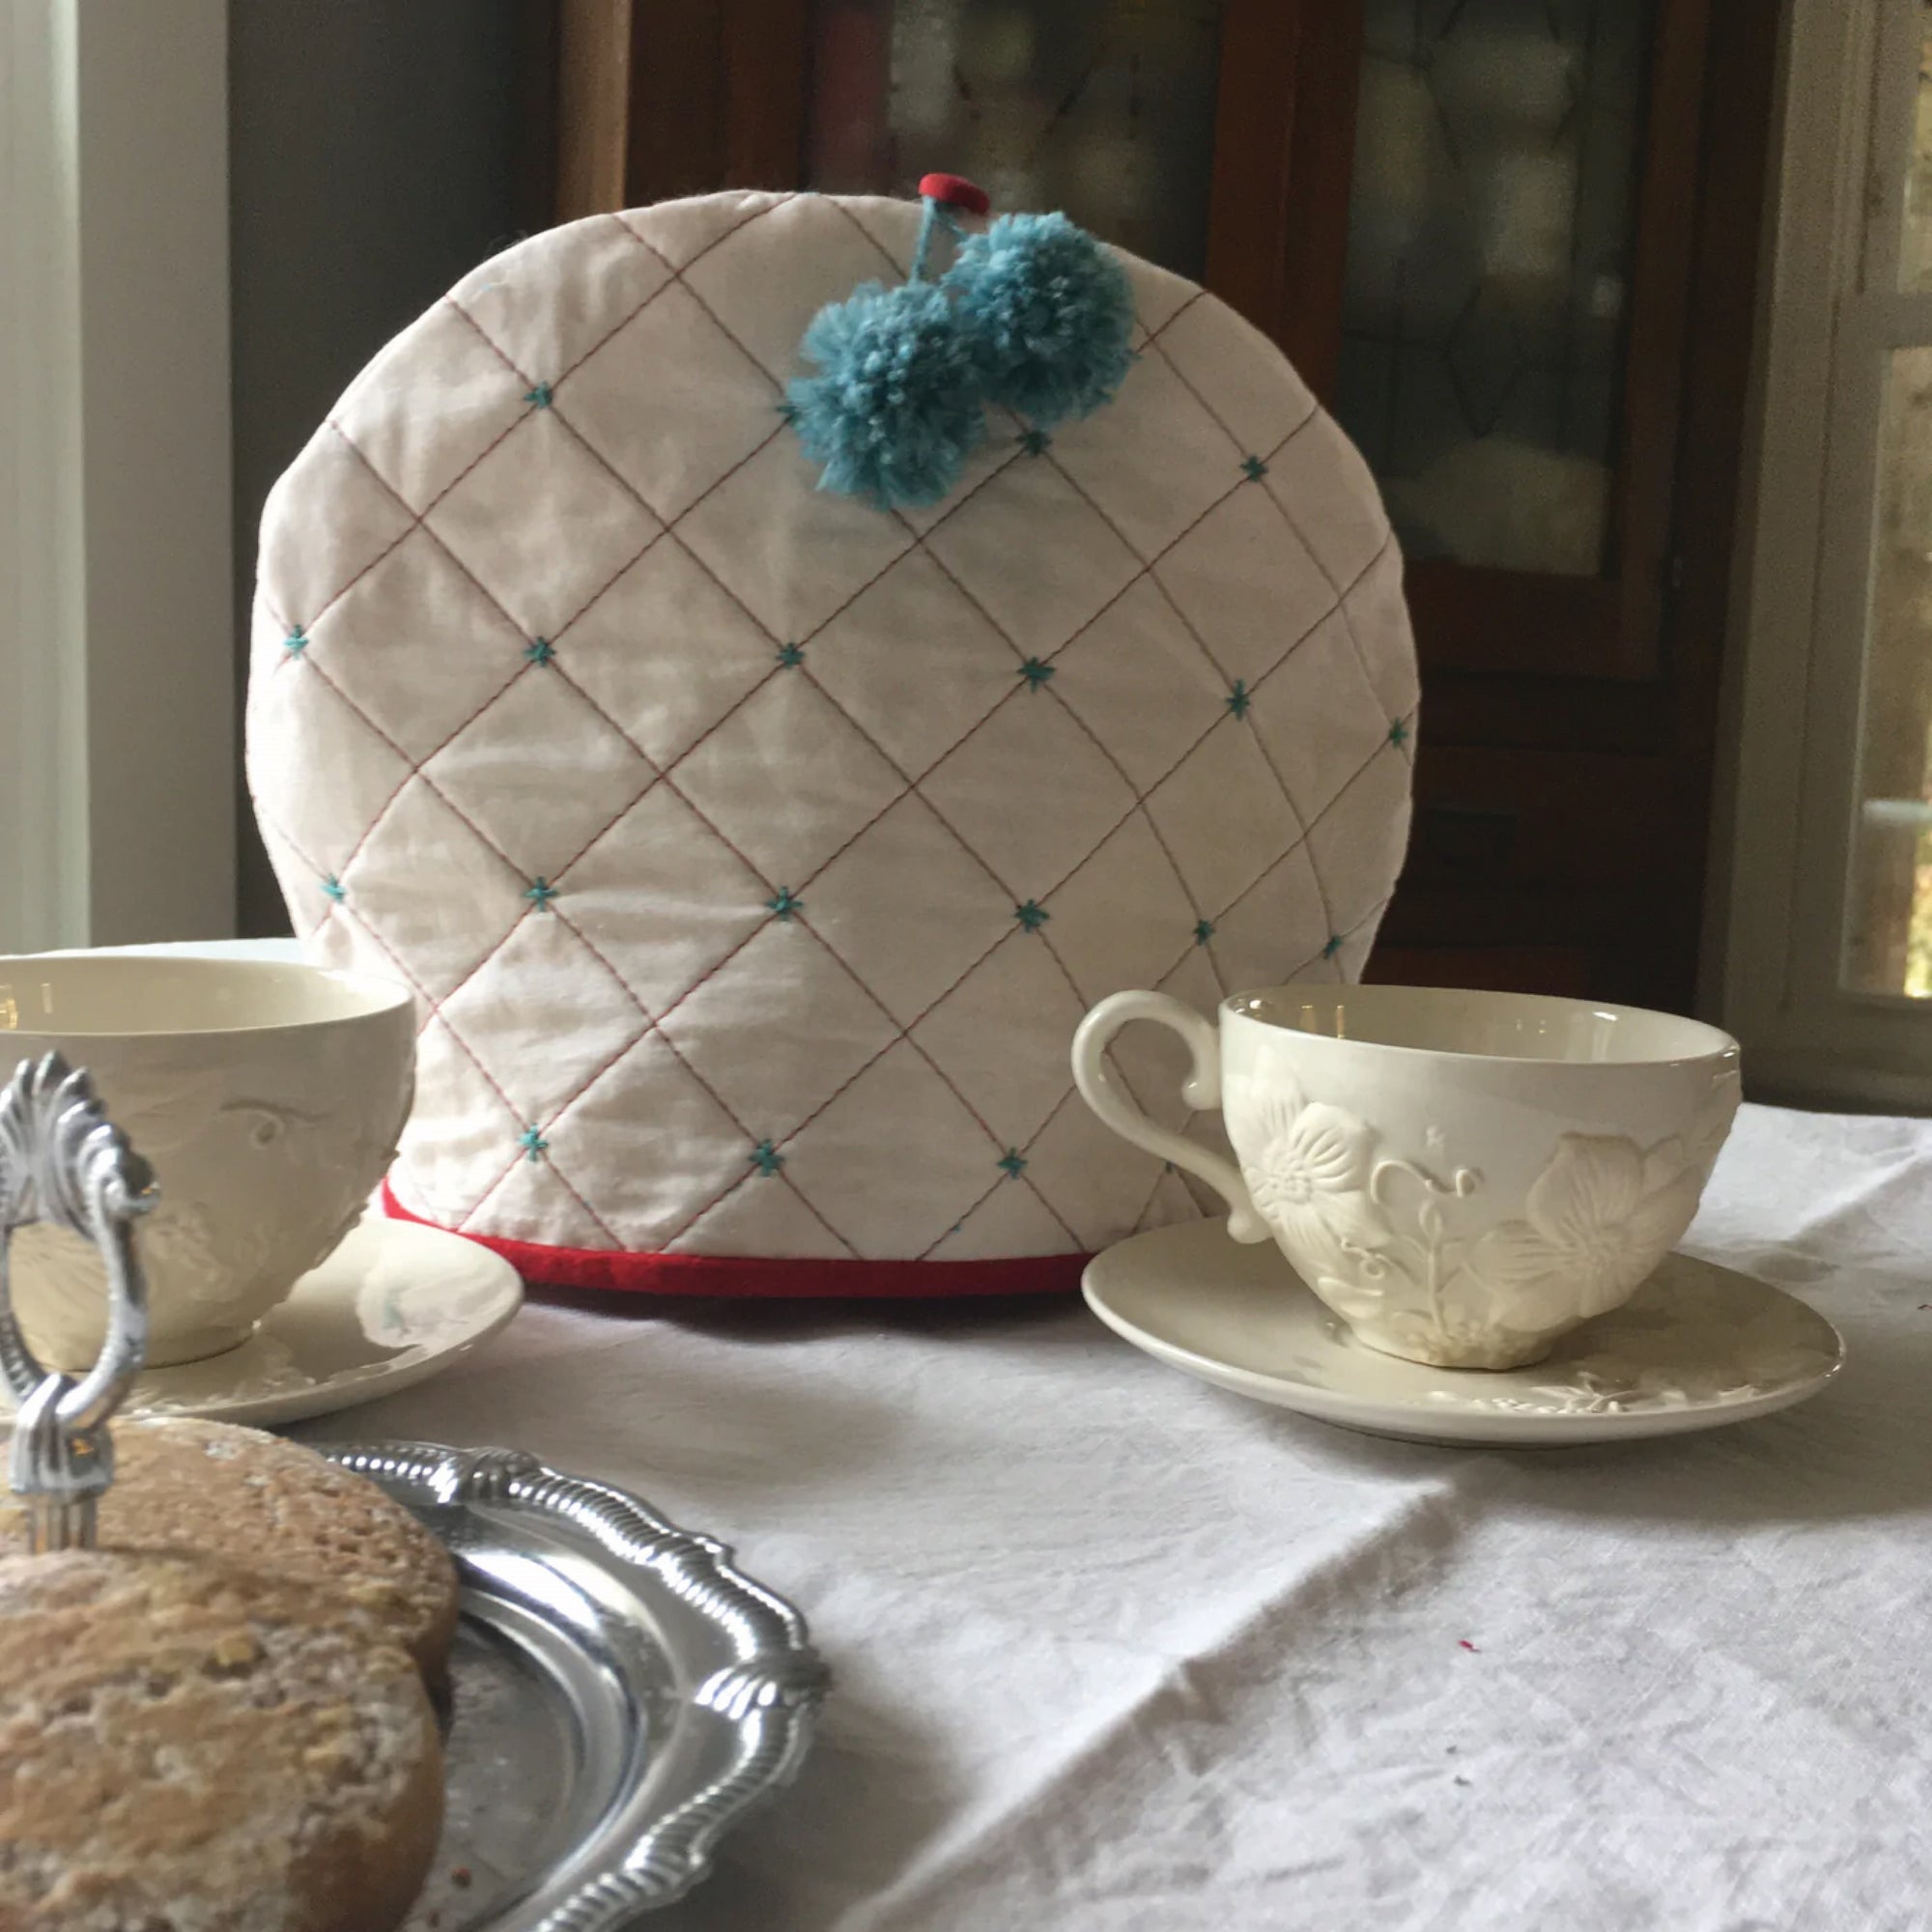 Quilted Tea Cozy - FREE pdf pattern